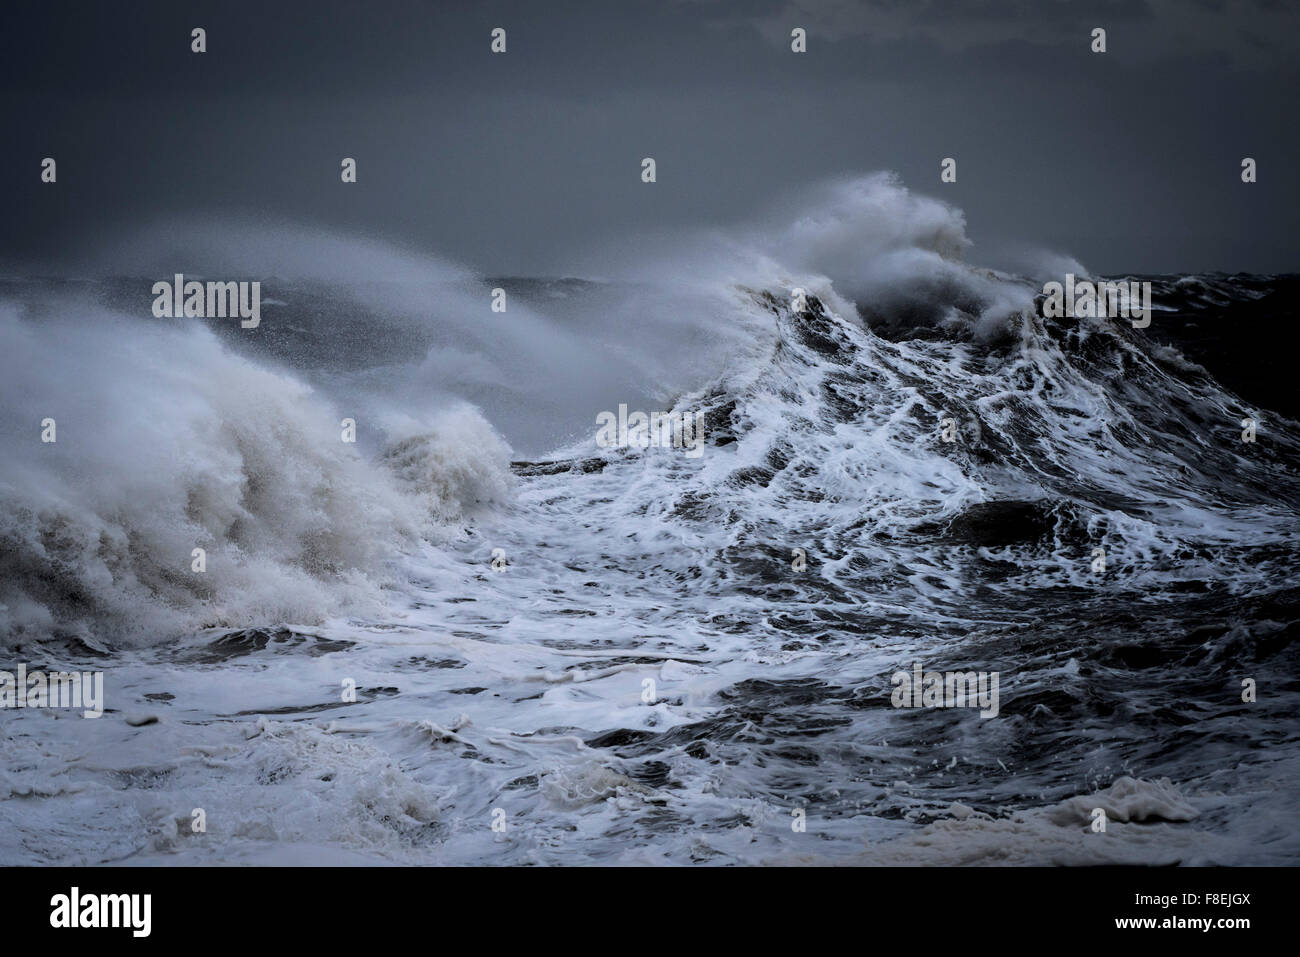 Wild seas as Storm Desmond batters the coast of Porthcawl in South Wales. Stock Photo